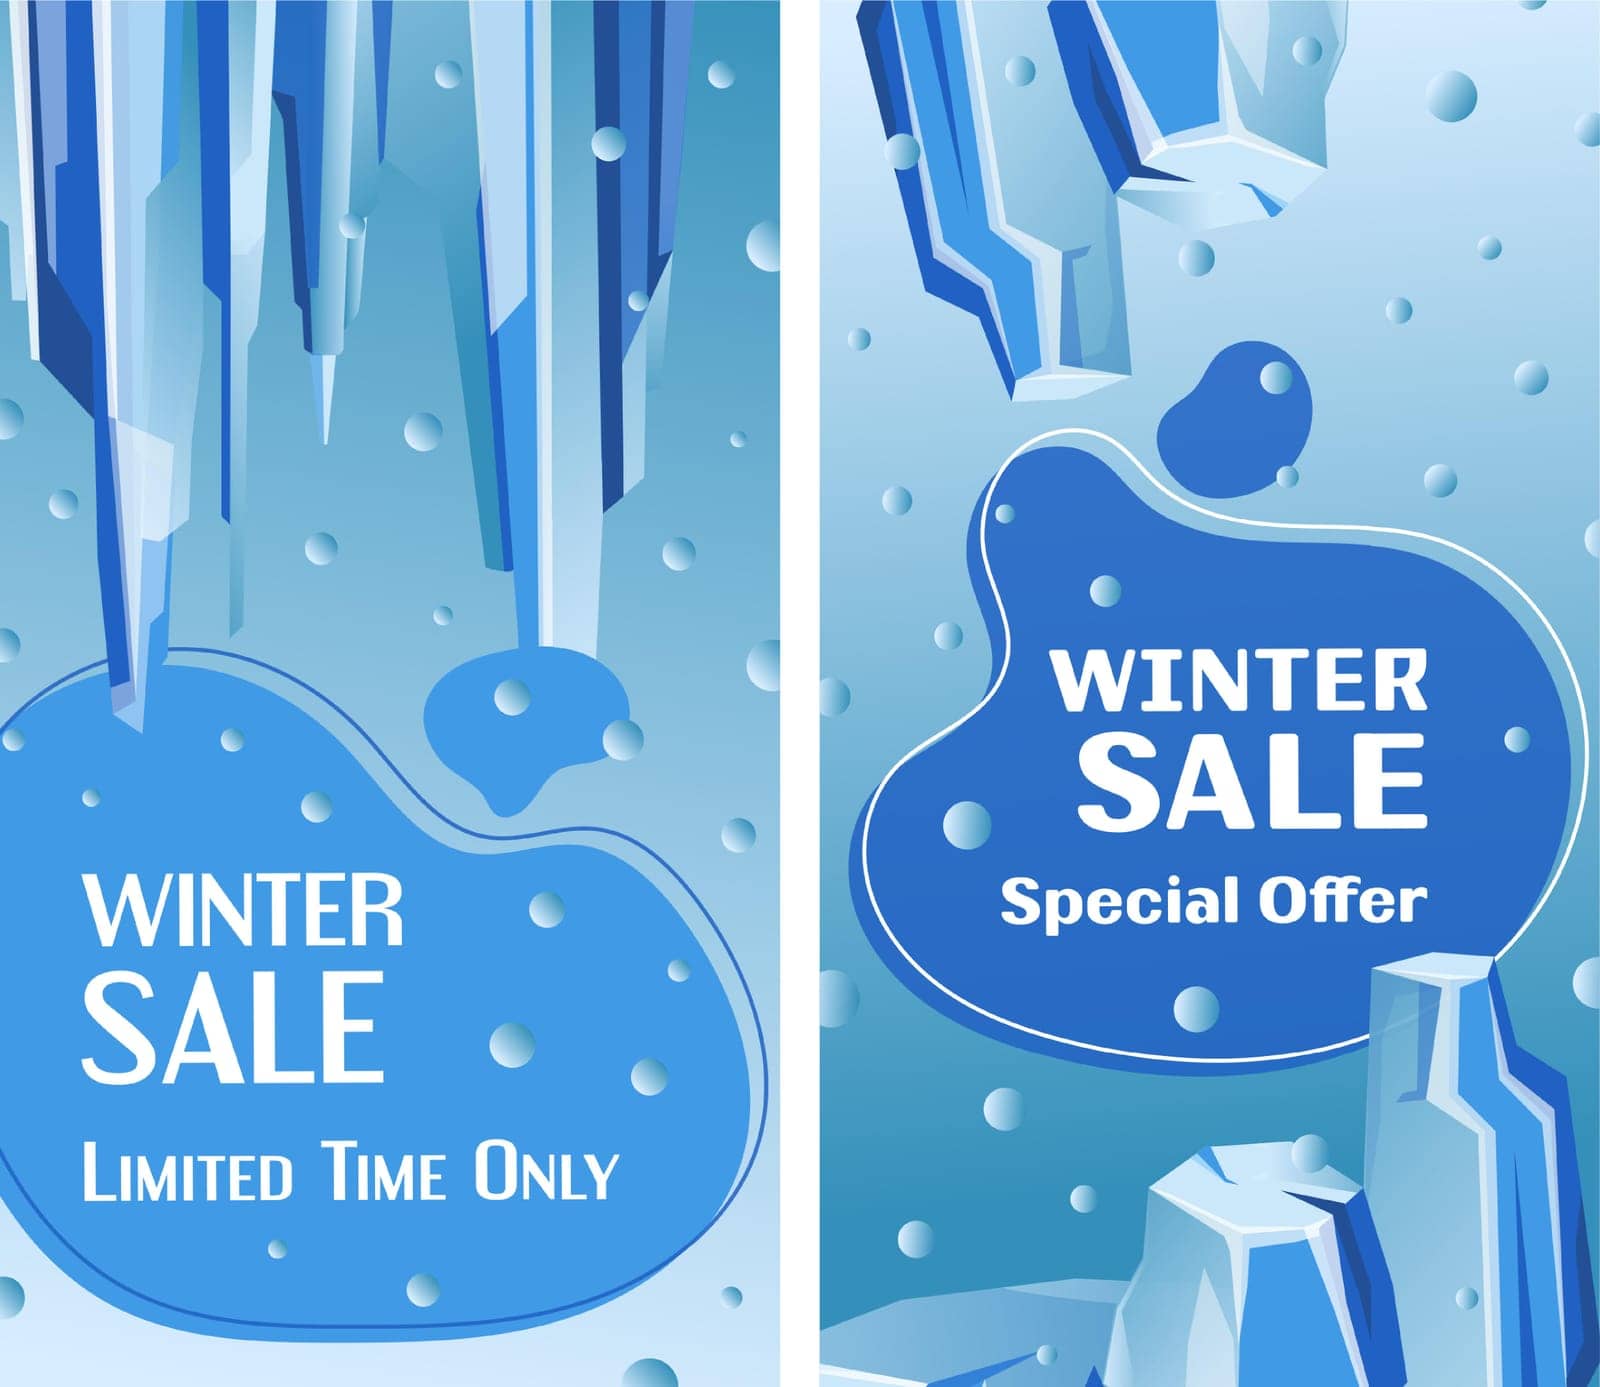 Winter sale, limited time only special offers by Sonulkaster